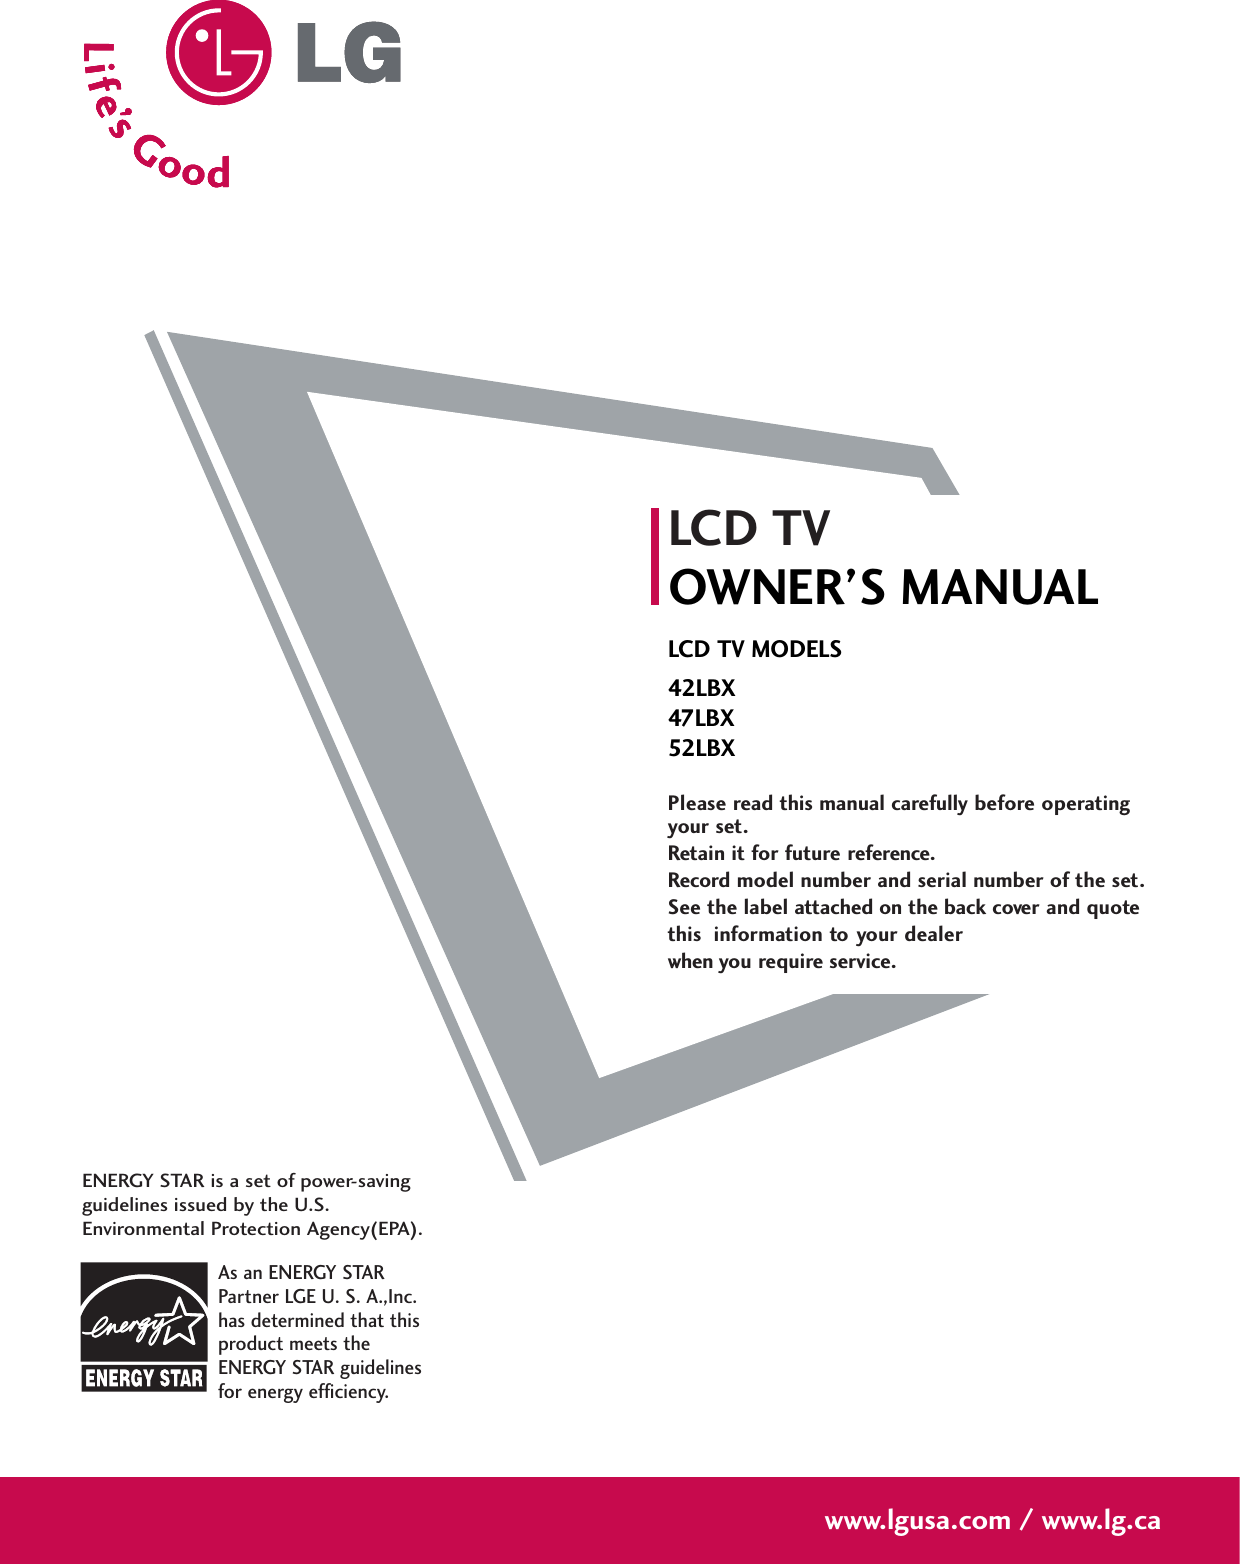 Please read this manual carefully before operatingyour set. Retain it for future reference.Record model number and serial number of the set. See the label attached on the back cover and quote this  information to your dealer when you require service.LCD TVOWNER’S MANUALLCD TV MODELS42LBX47LBX52LBXwww.lgusa.com / www.lg.caAs an ENERGY STARPartner LGE U. S. A.,Inc.has determined that thisproduct meets theENERGY STAR guidelinesfor energy efficiency.ENERGY STAR is a set of power-savingguidelines issued by the U.S.Environmental Protection Agency(EPA).